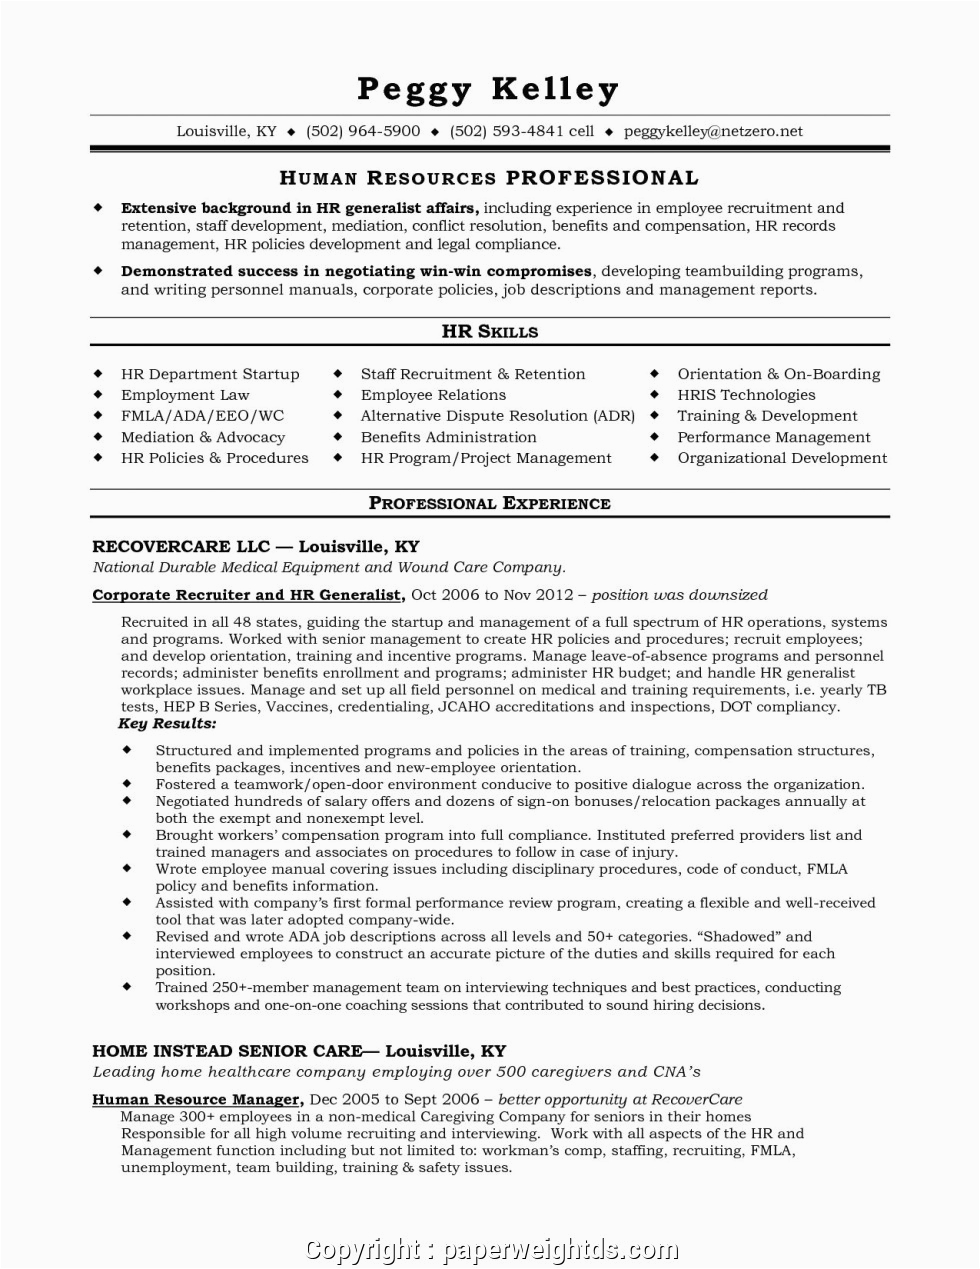 Human Resources Resume Templates Entry Level Free Entry Level Human Resources Manager Resume Human